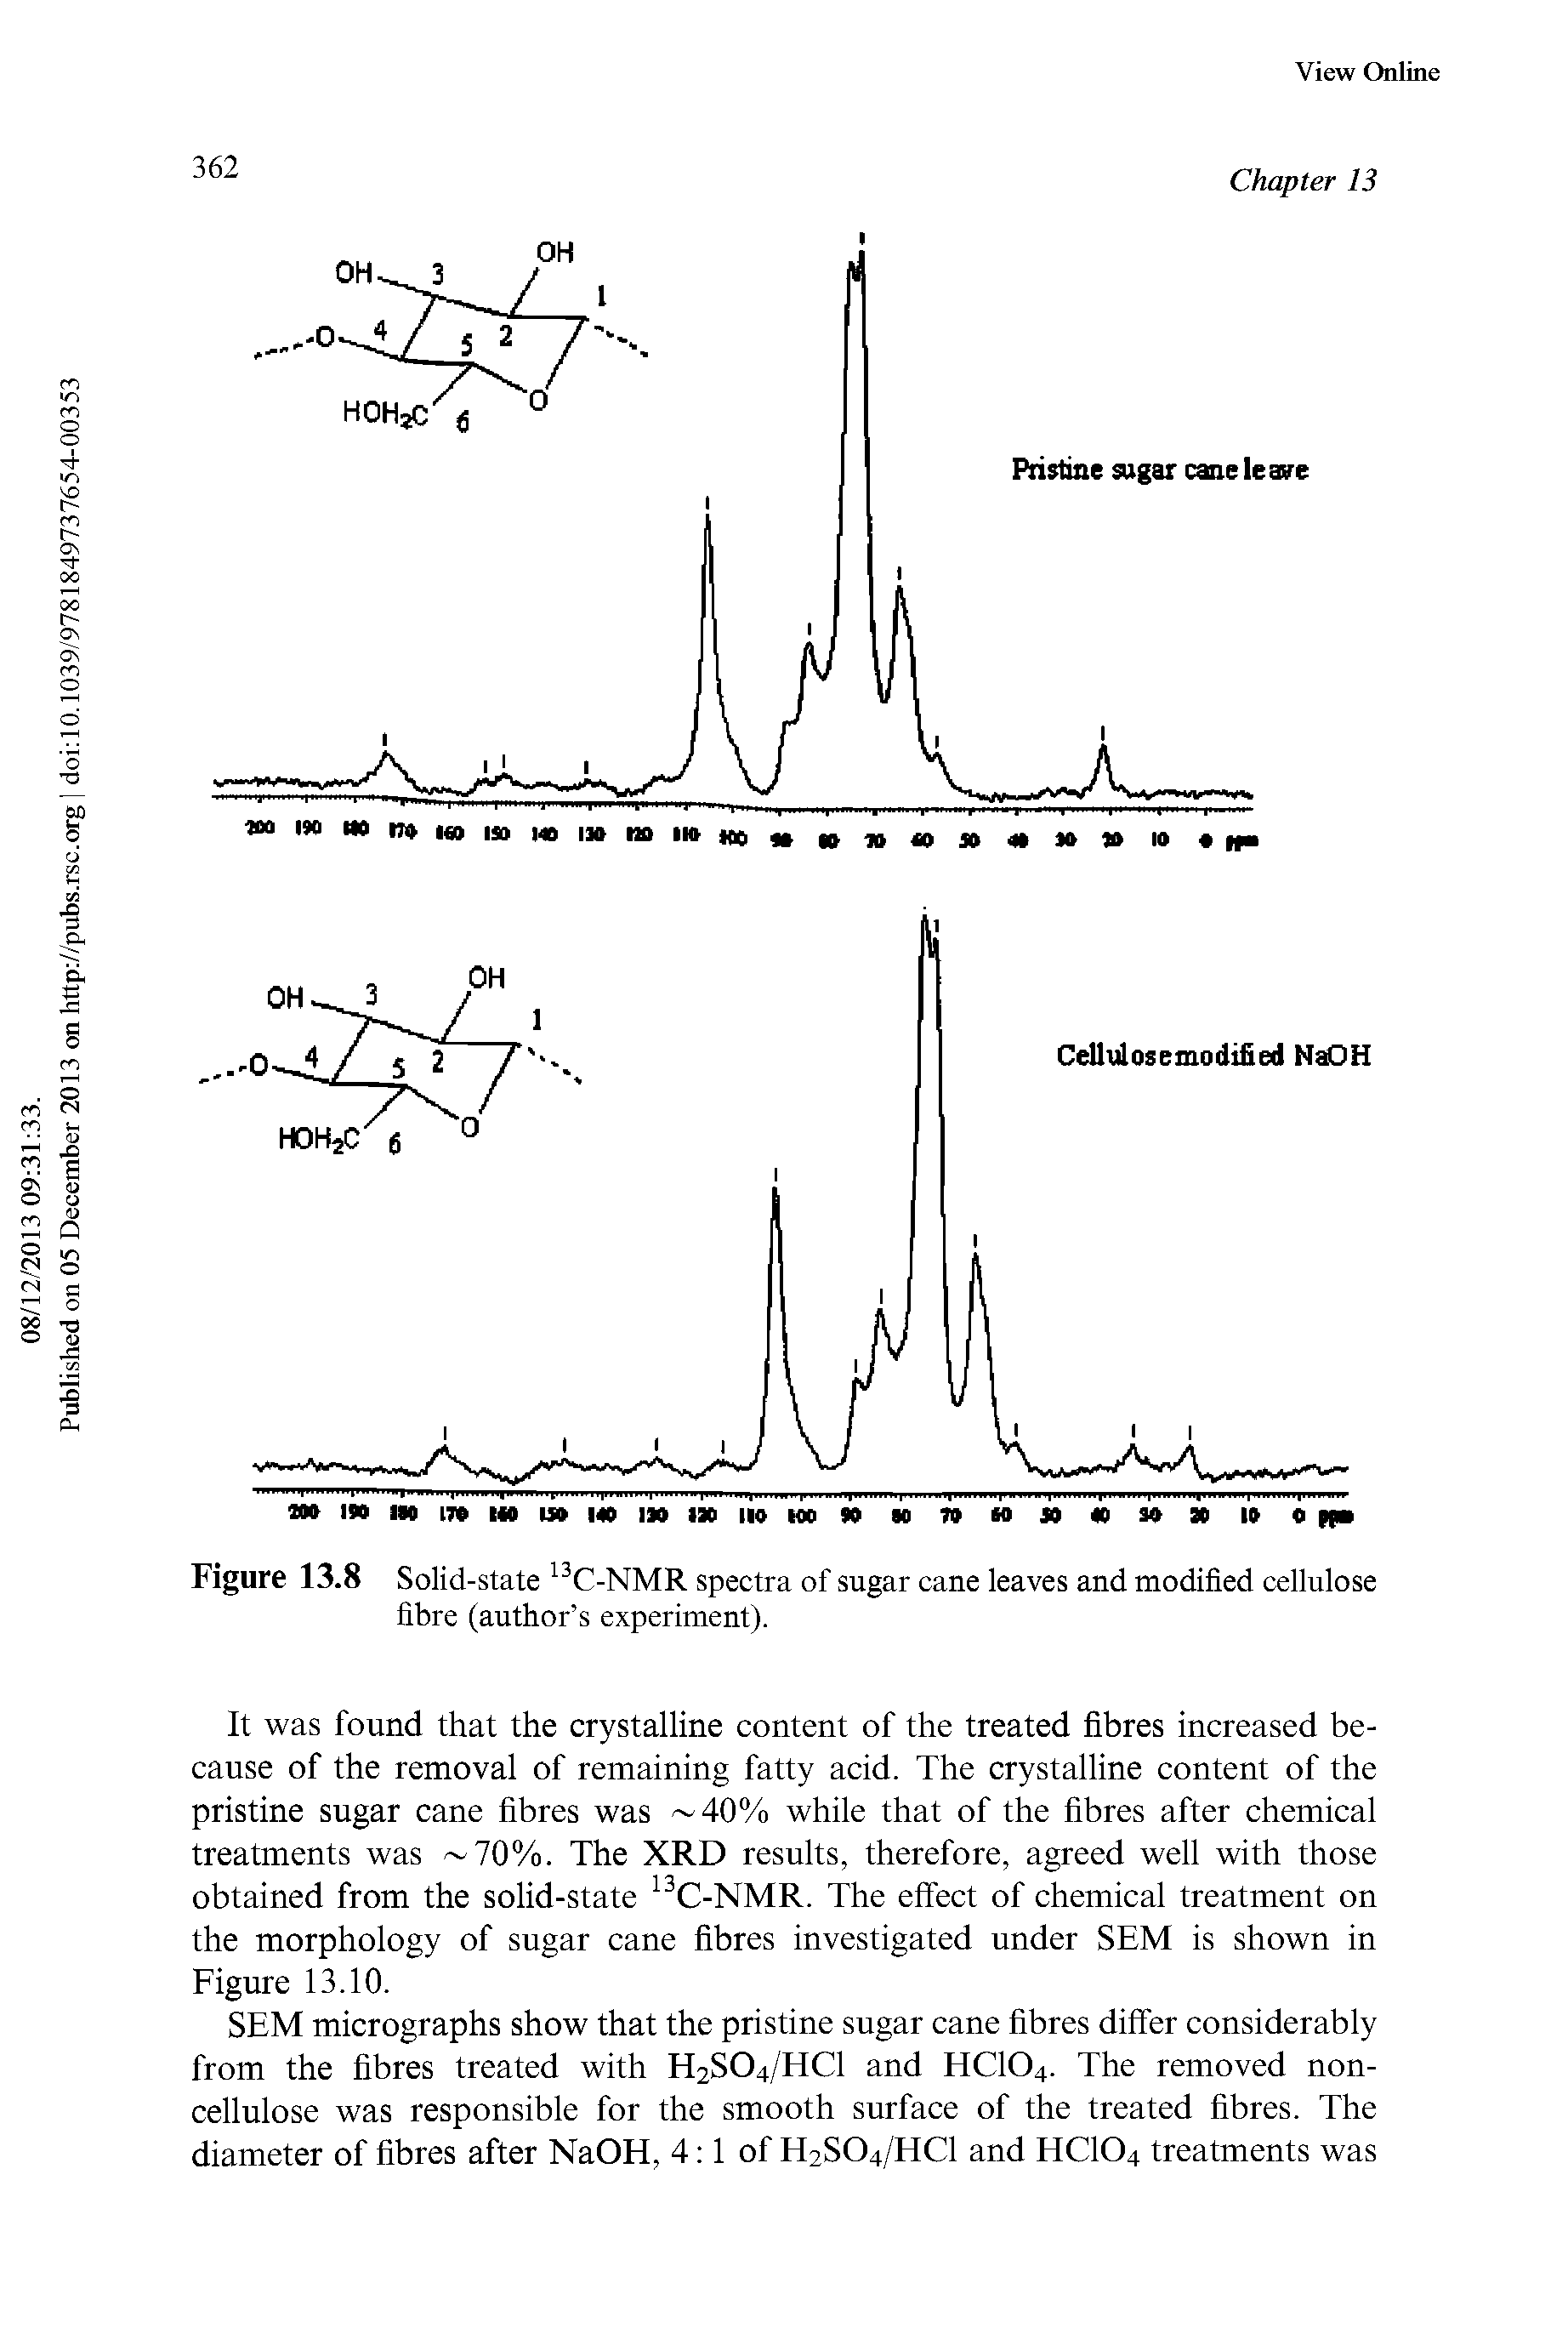 Figure 13.8 Solid-state C-NMR spectra of sugar cane leaves and modified cellulose fibre (author s experiment).